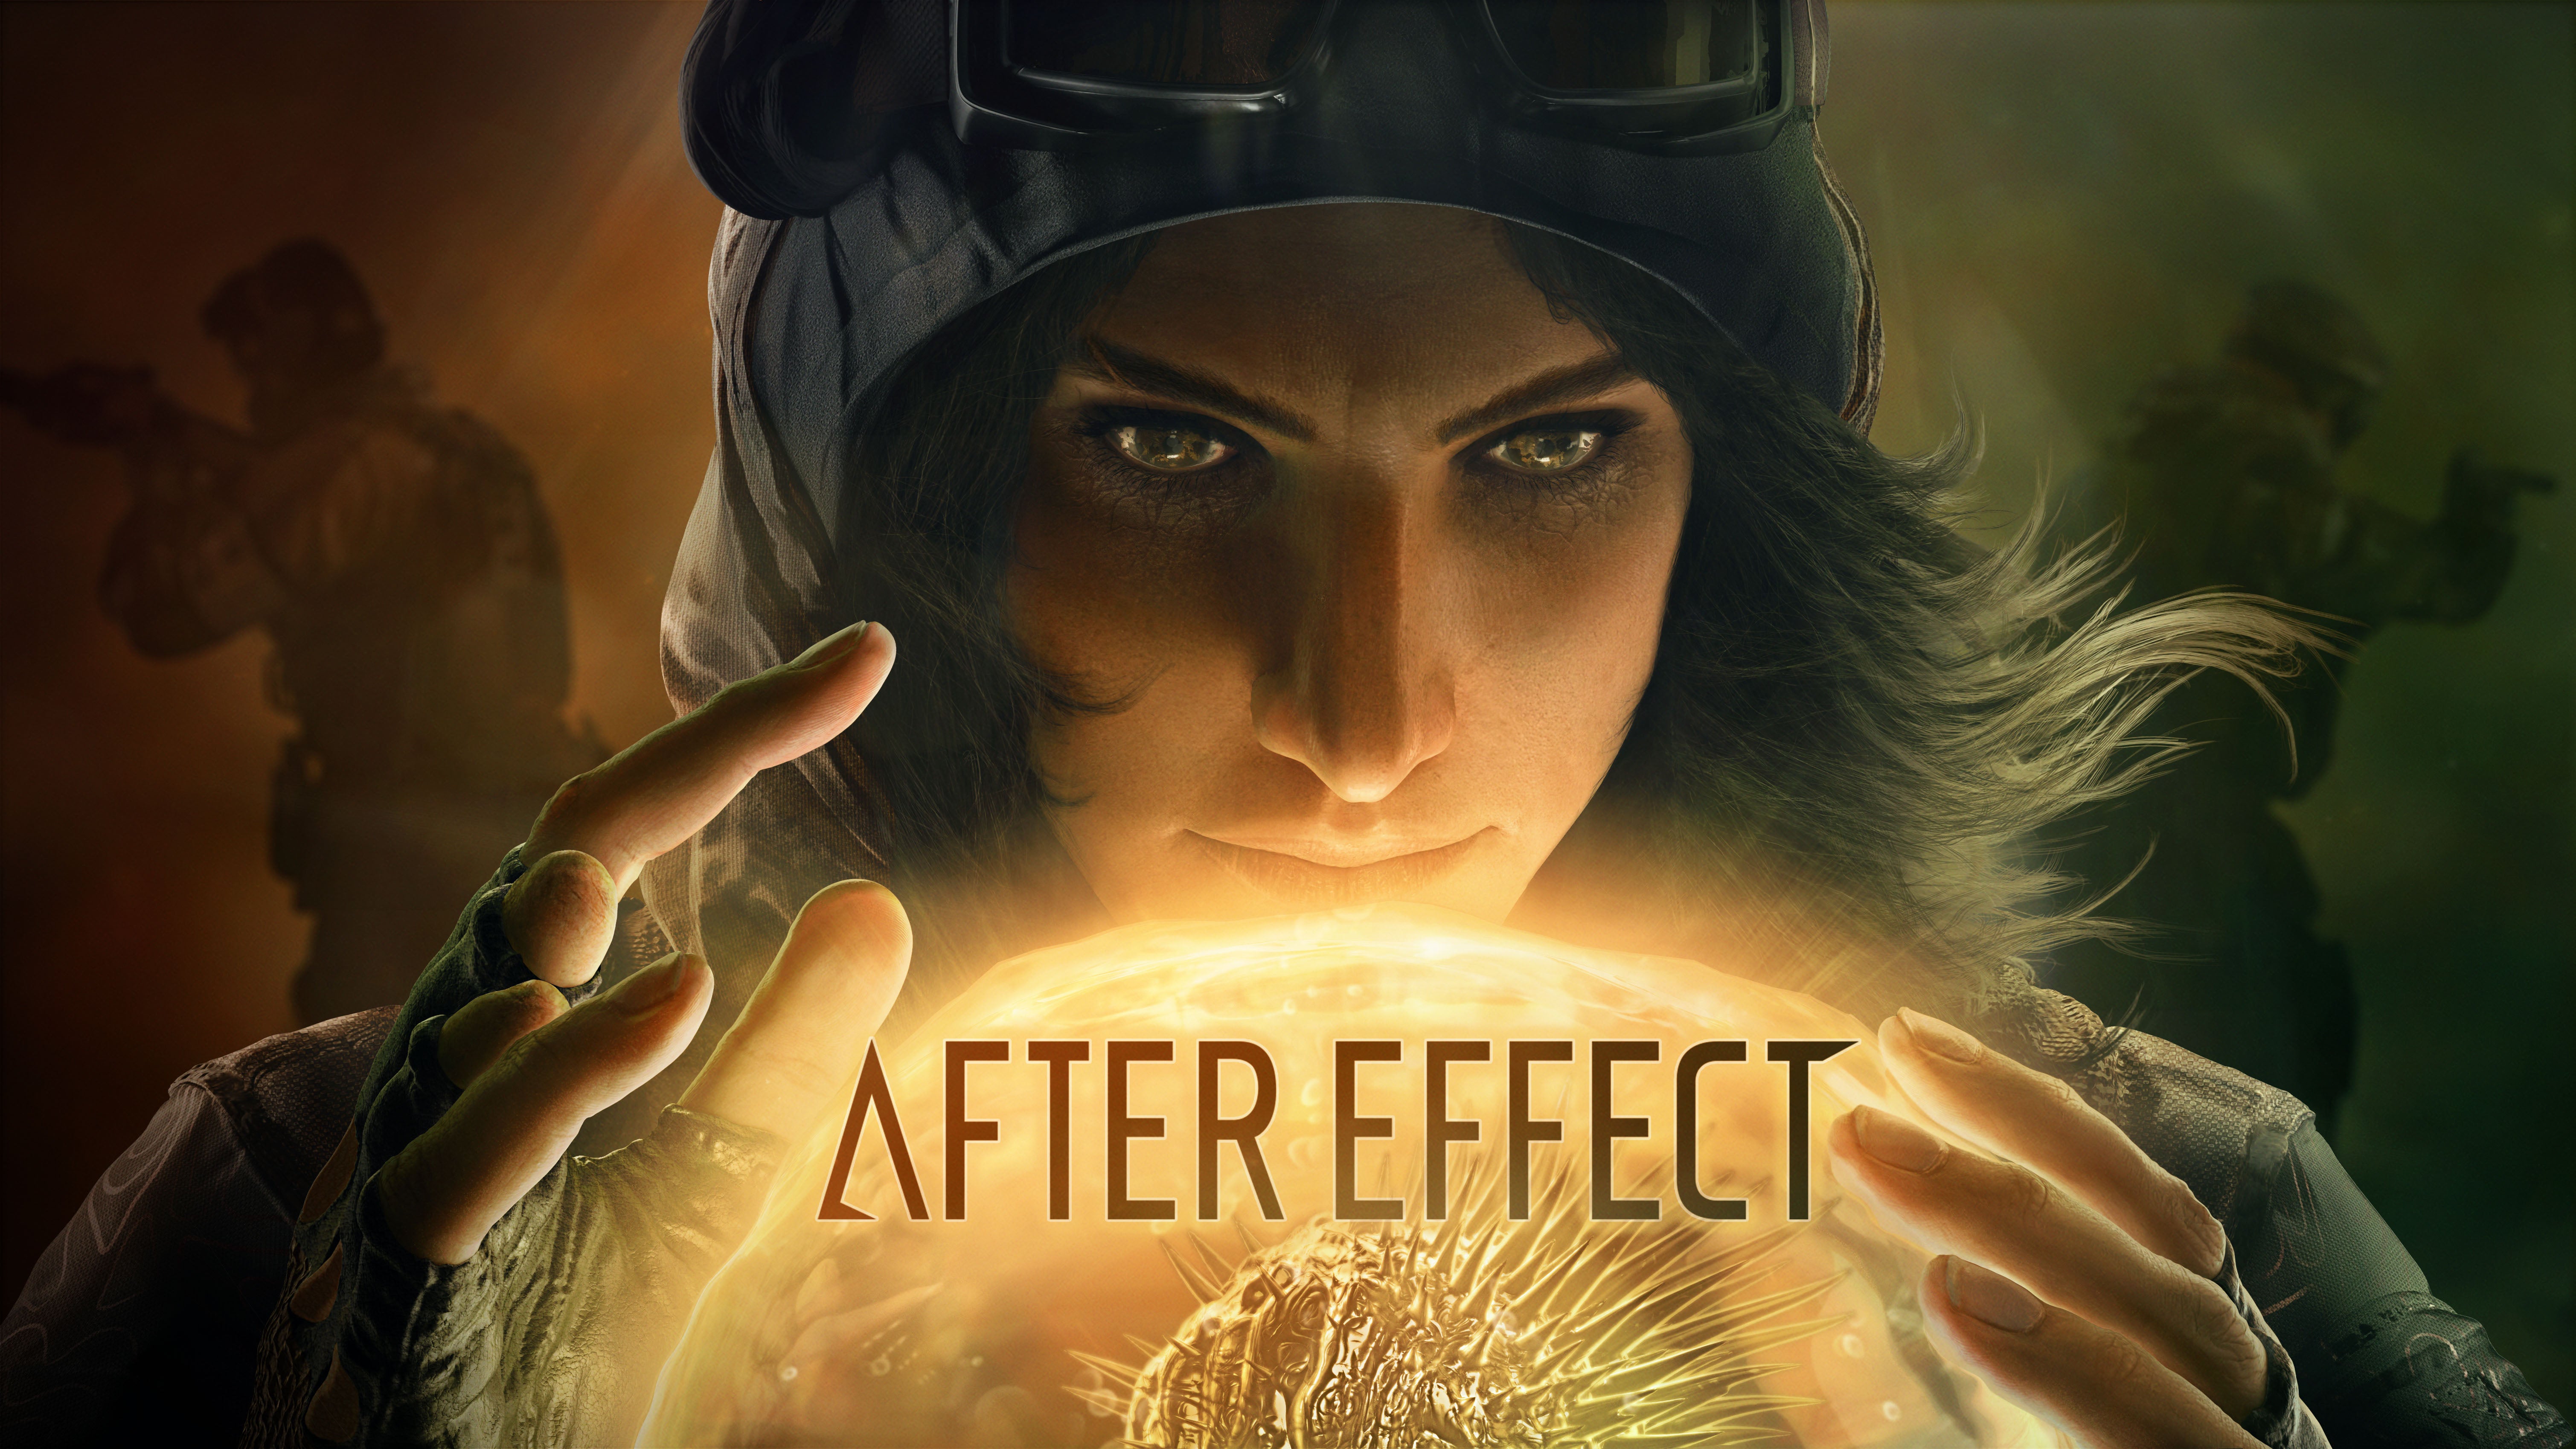 Rainbow Six Extraction's next Crisis Event, After Effect, is
now available